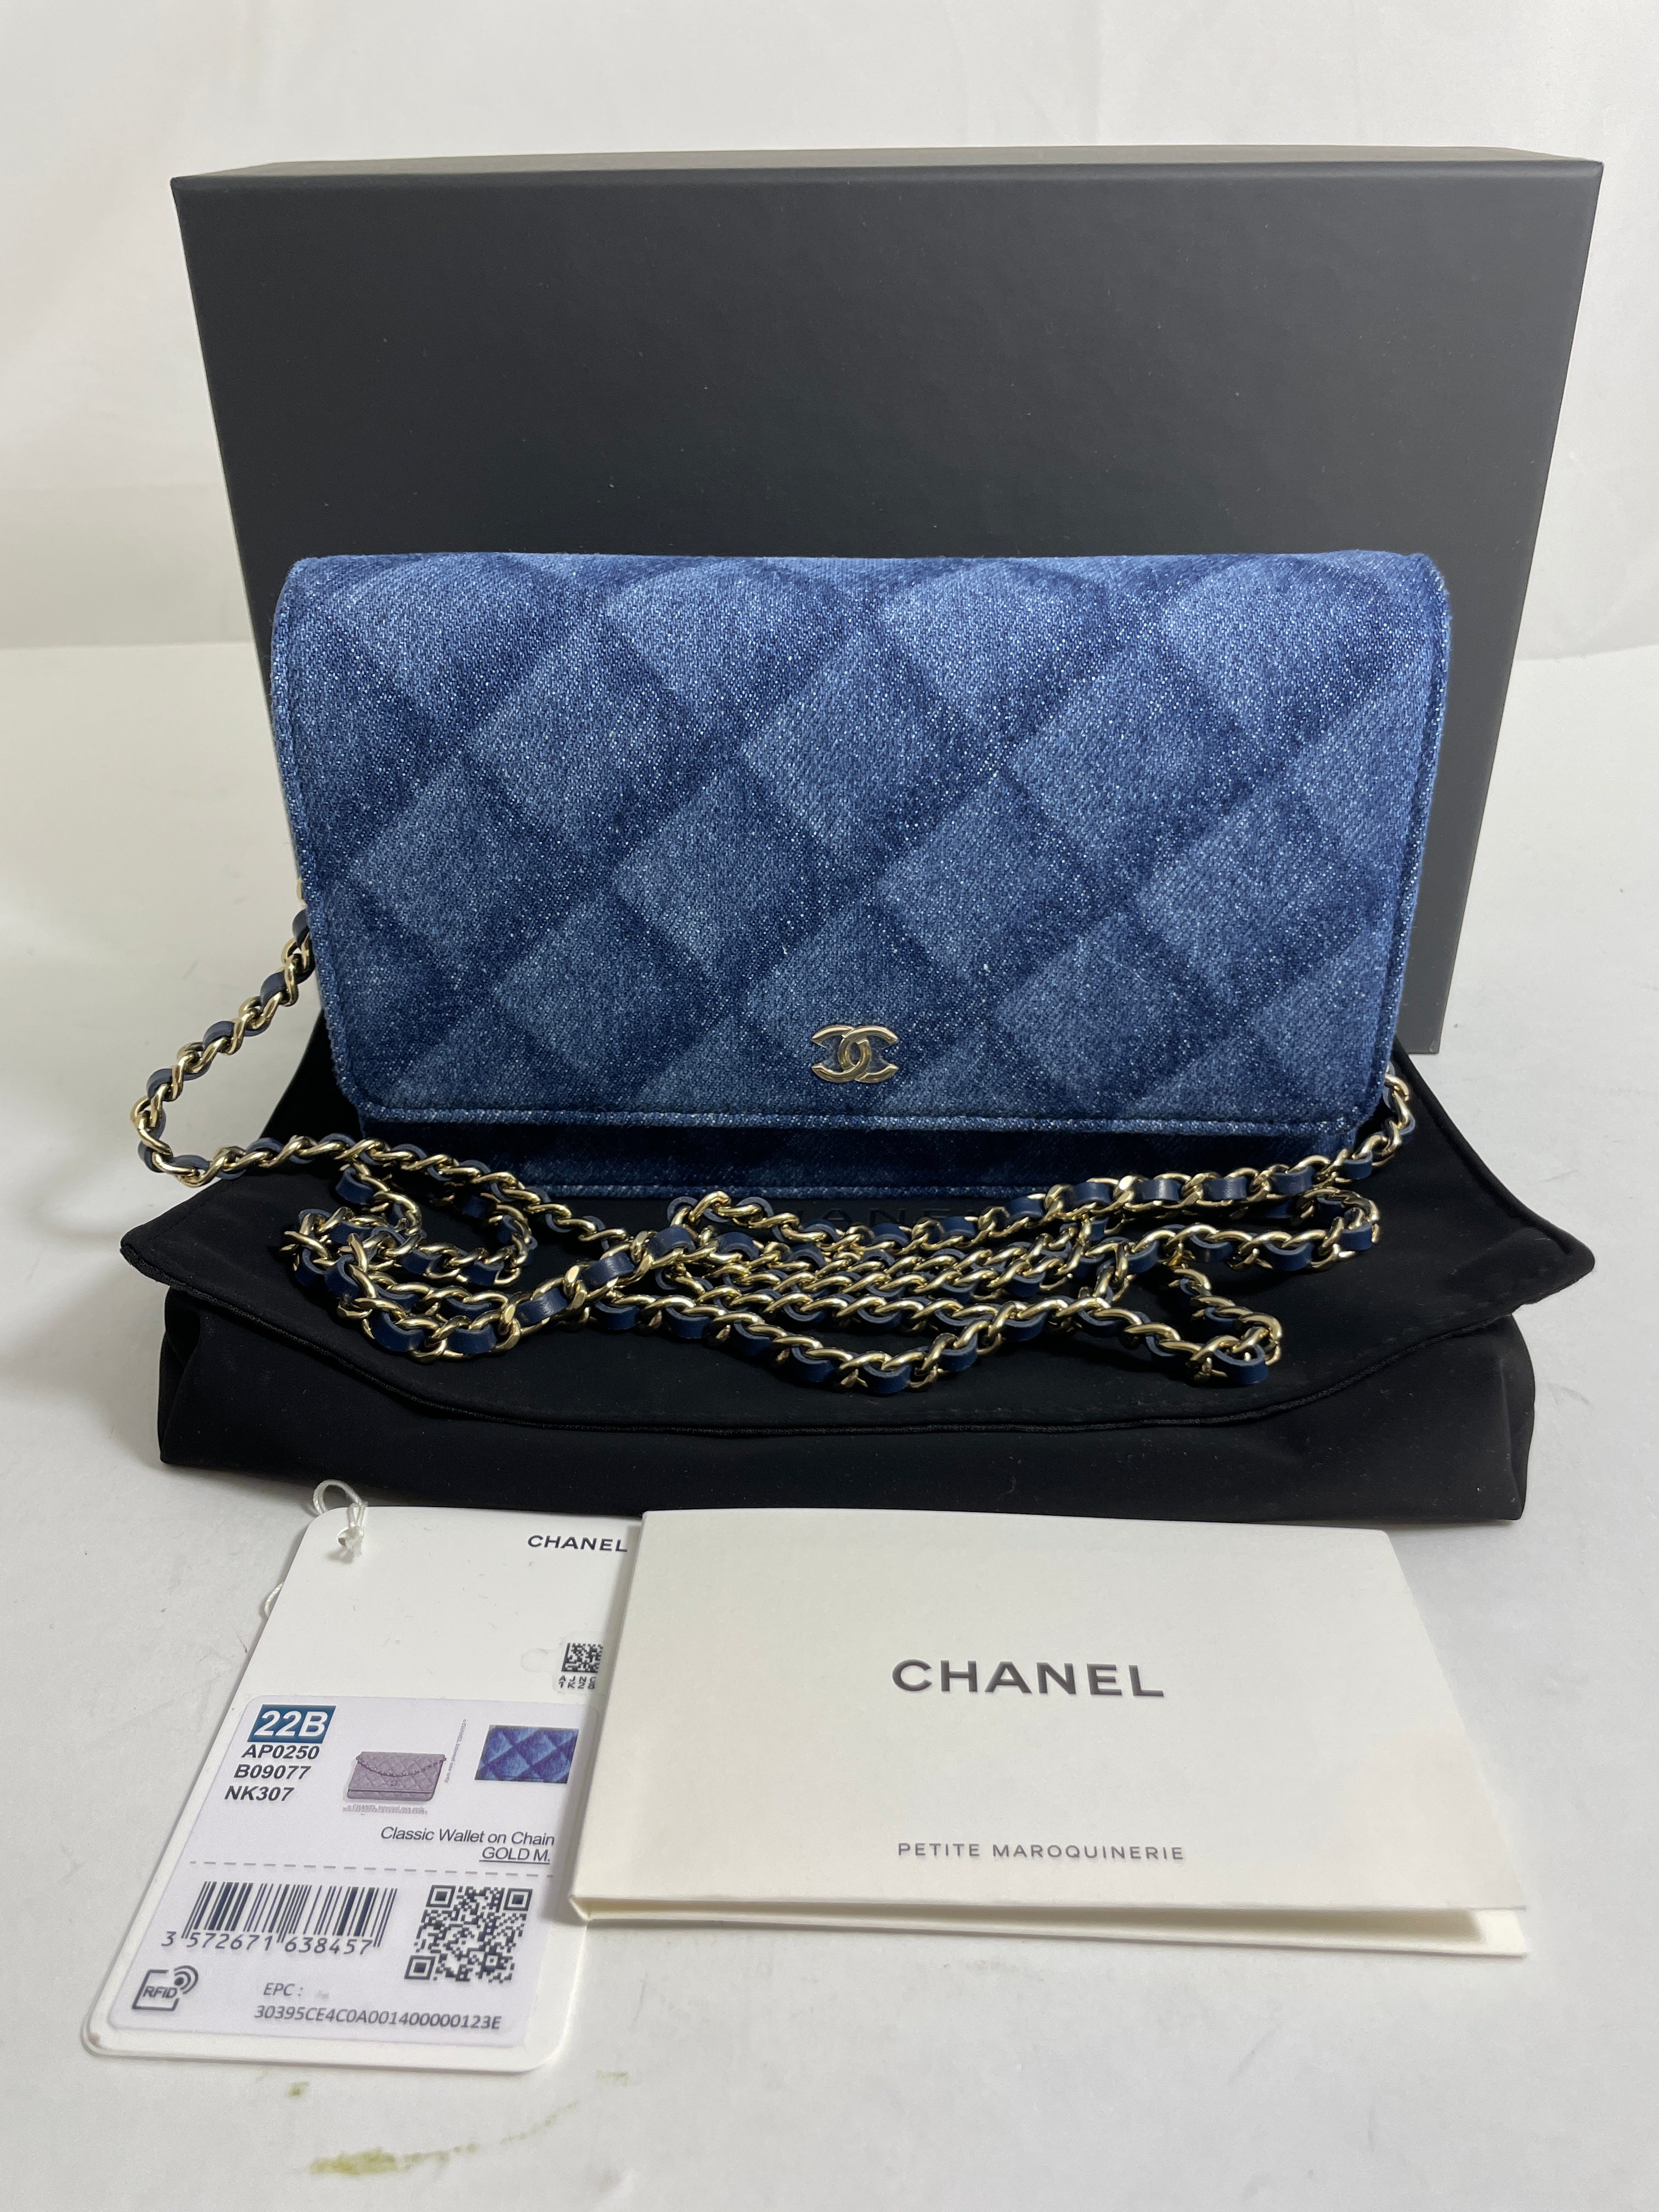 Chanel Caviar Leather Wallet On A Chain Blue with Silver Hardware